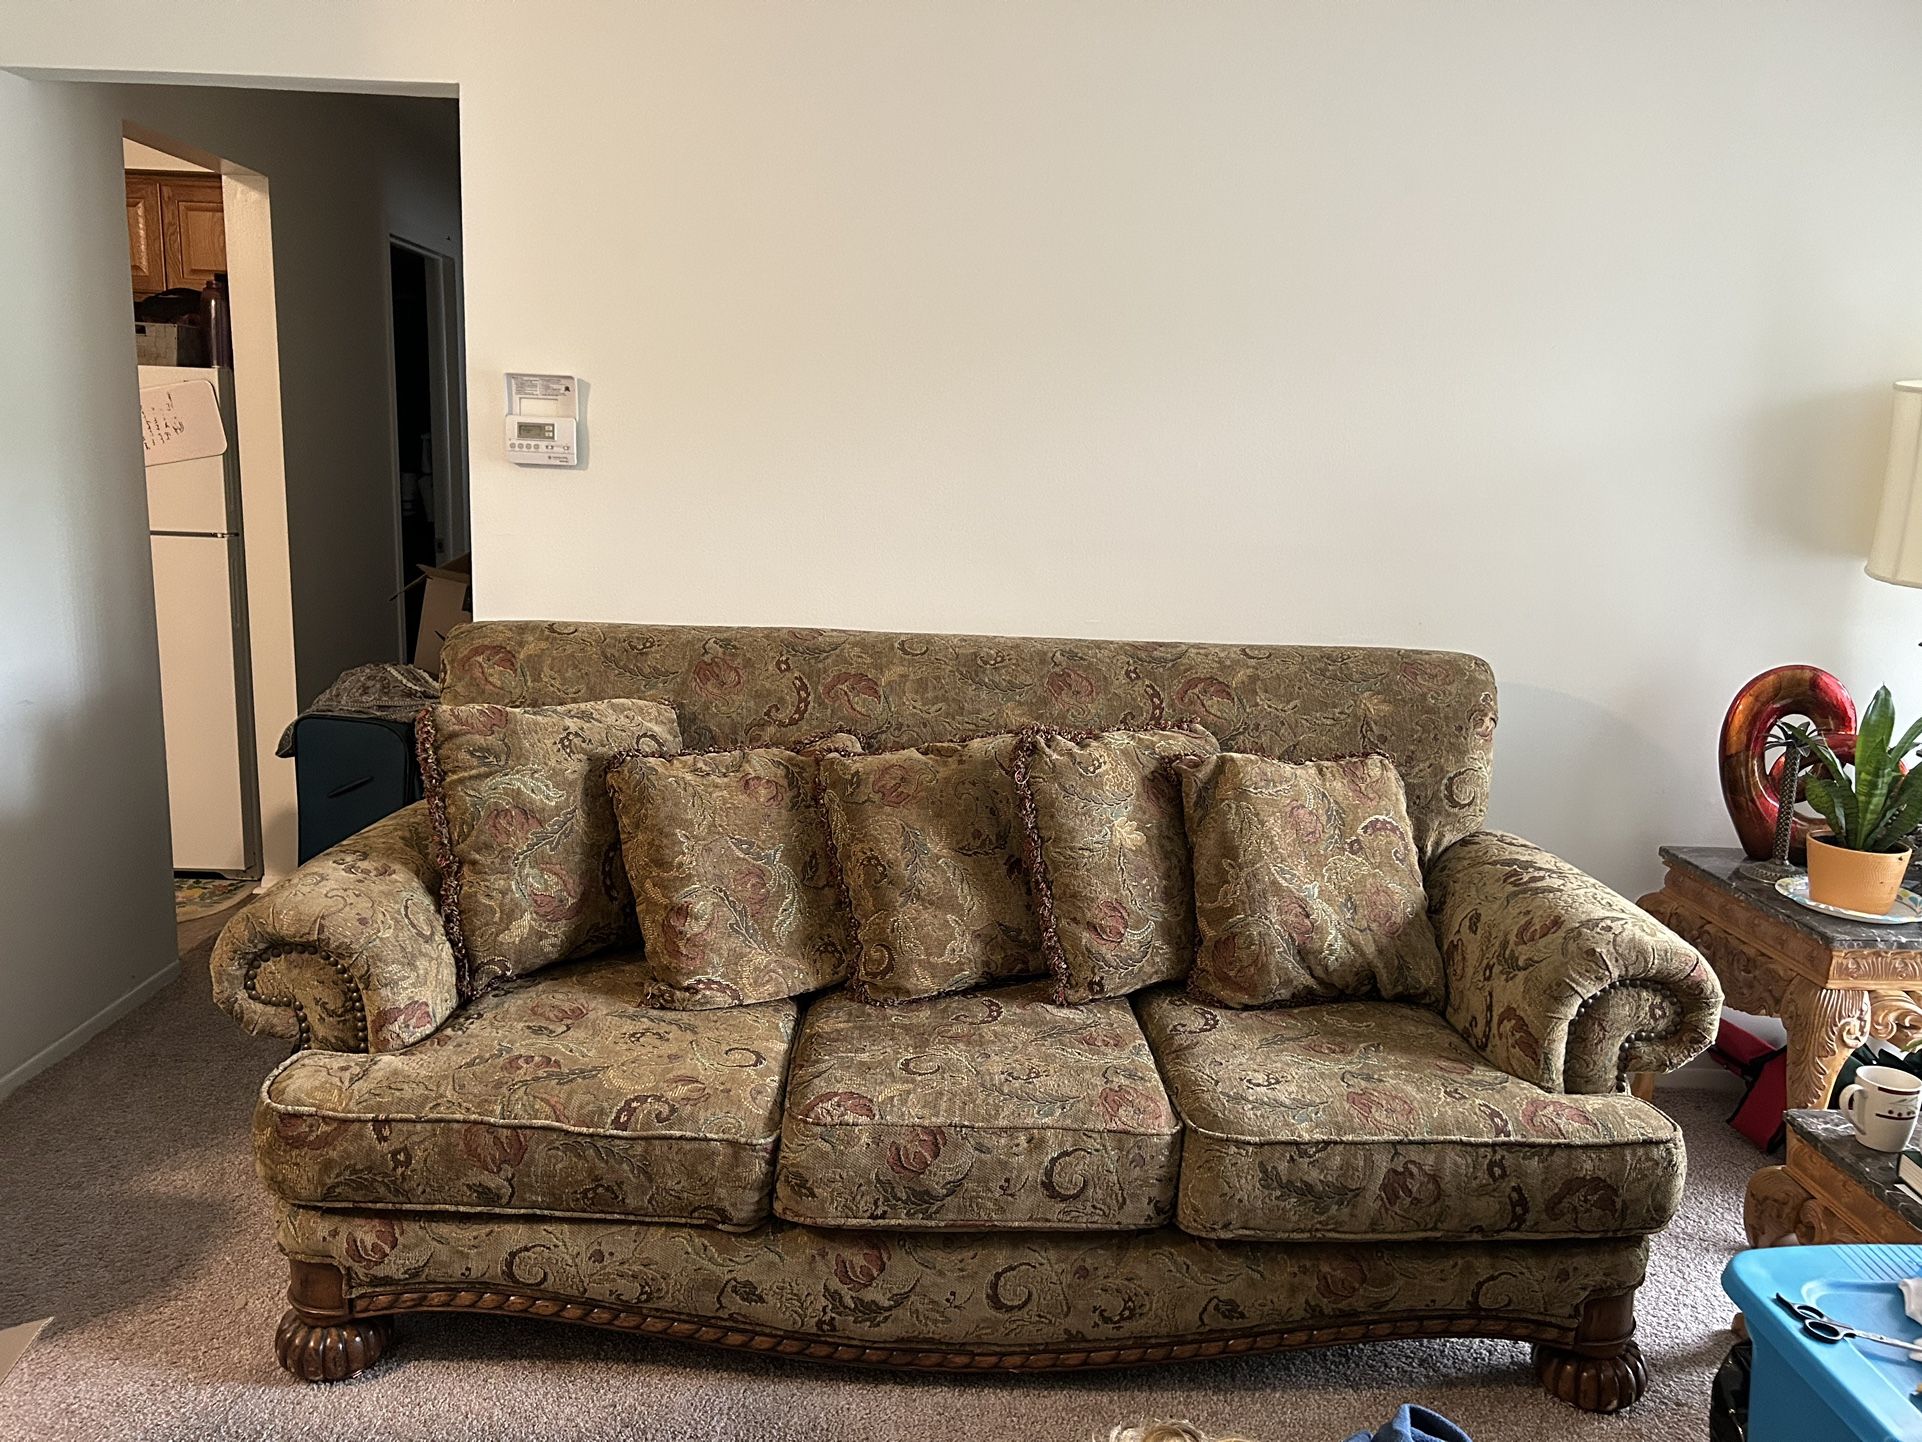 Couch And Loveseat For Sale Paisley Print Good Condition Smoke-Free Home Moving Must Go